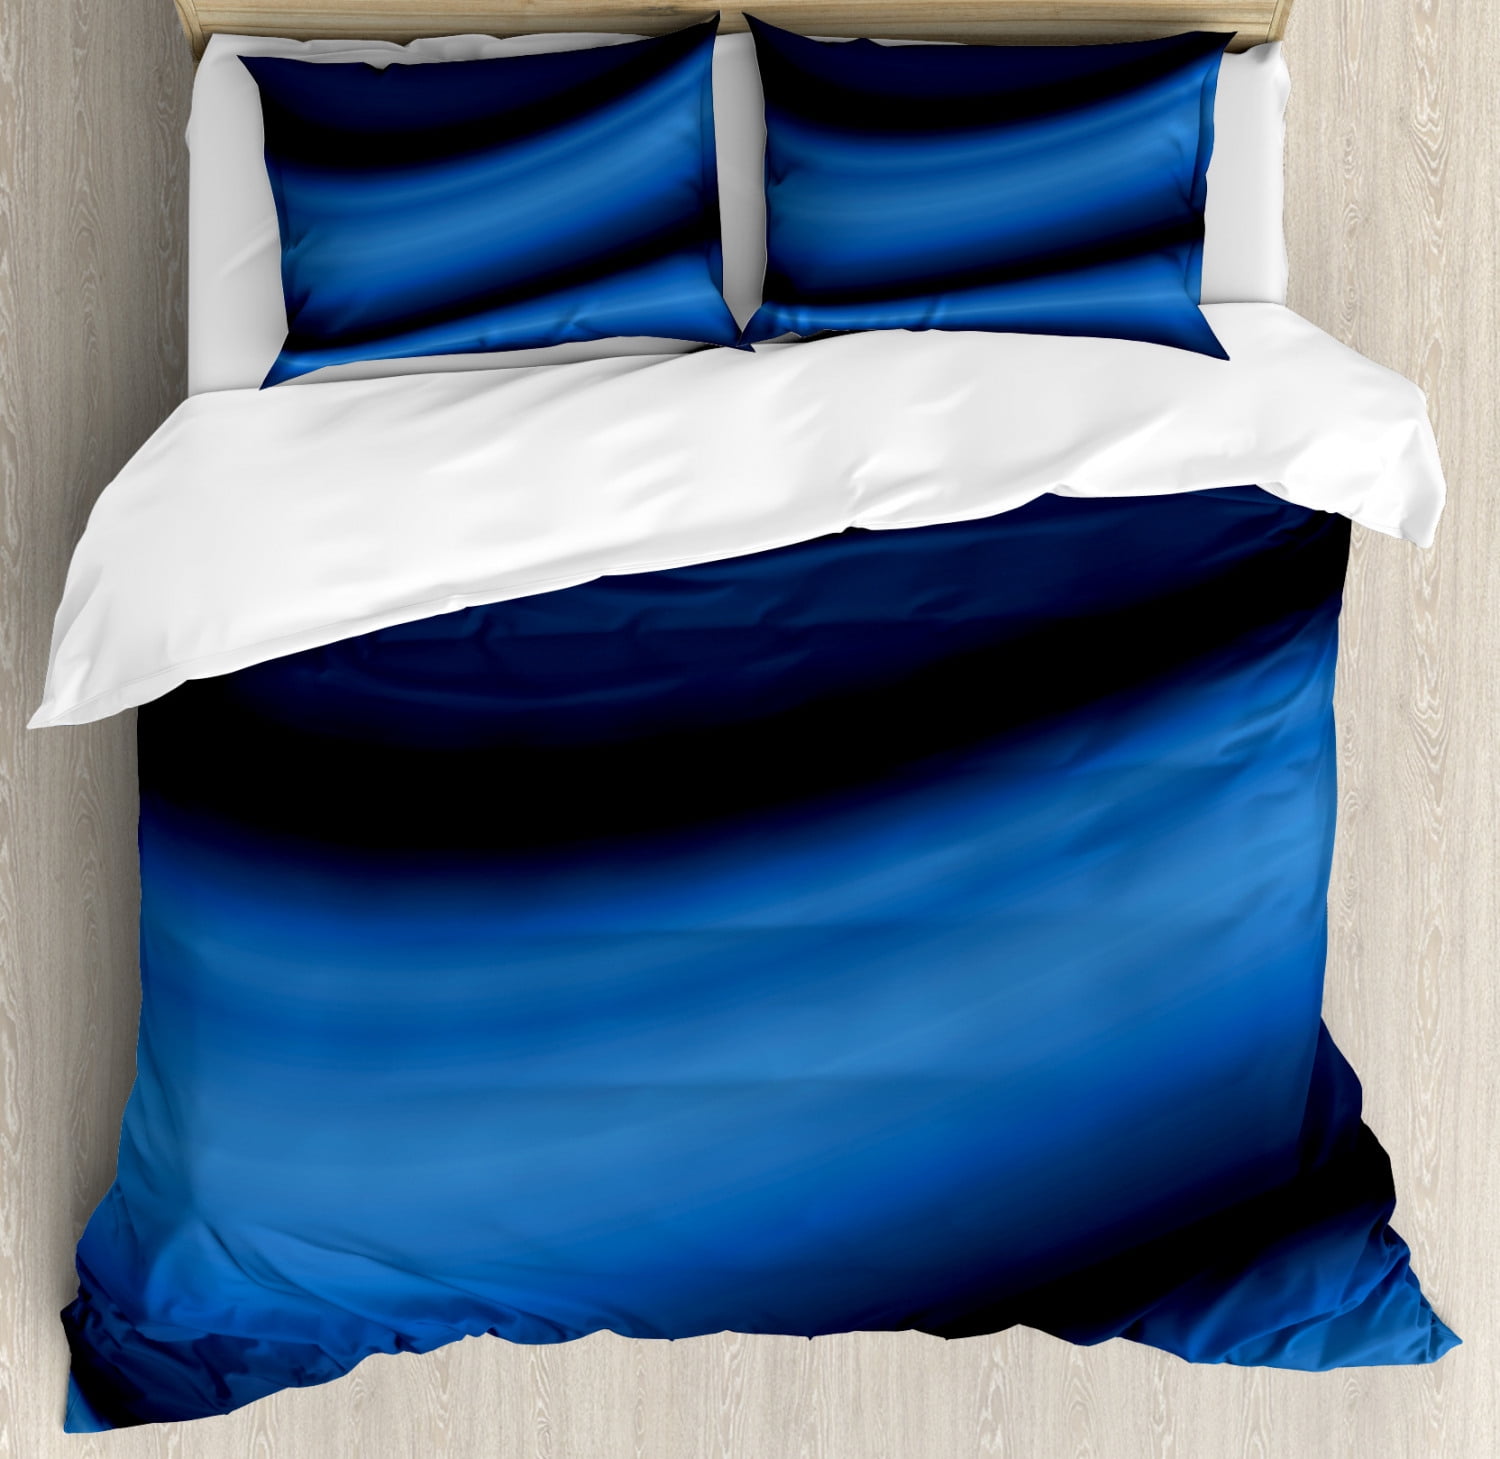 Dark Blue Duvet Cover Set Queen Size, Abstract Wavy Curvy Bold Color ...